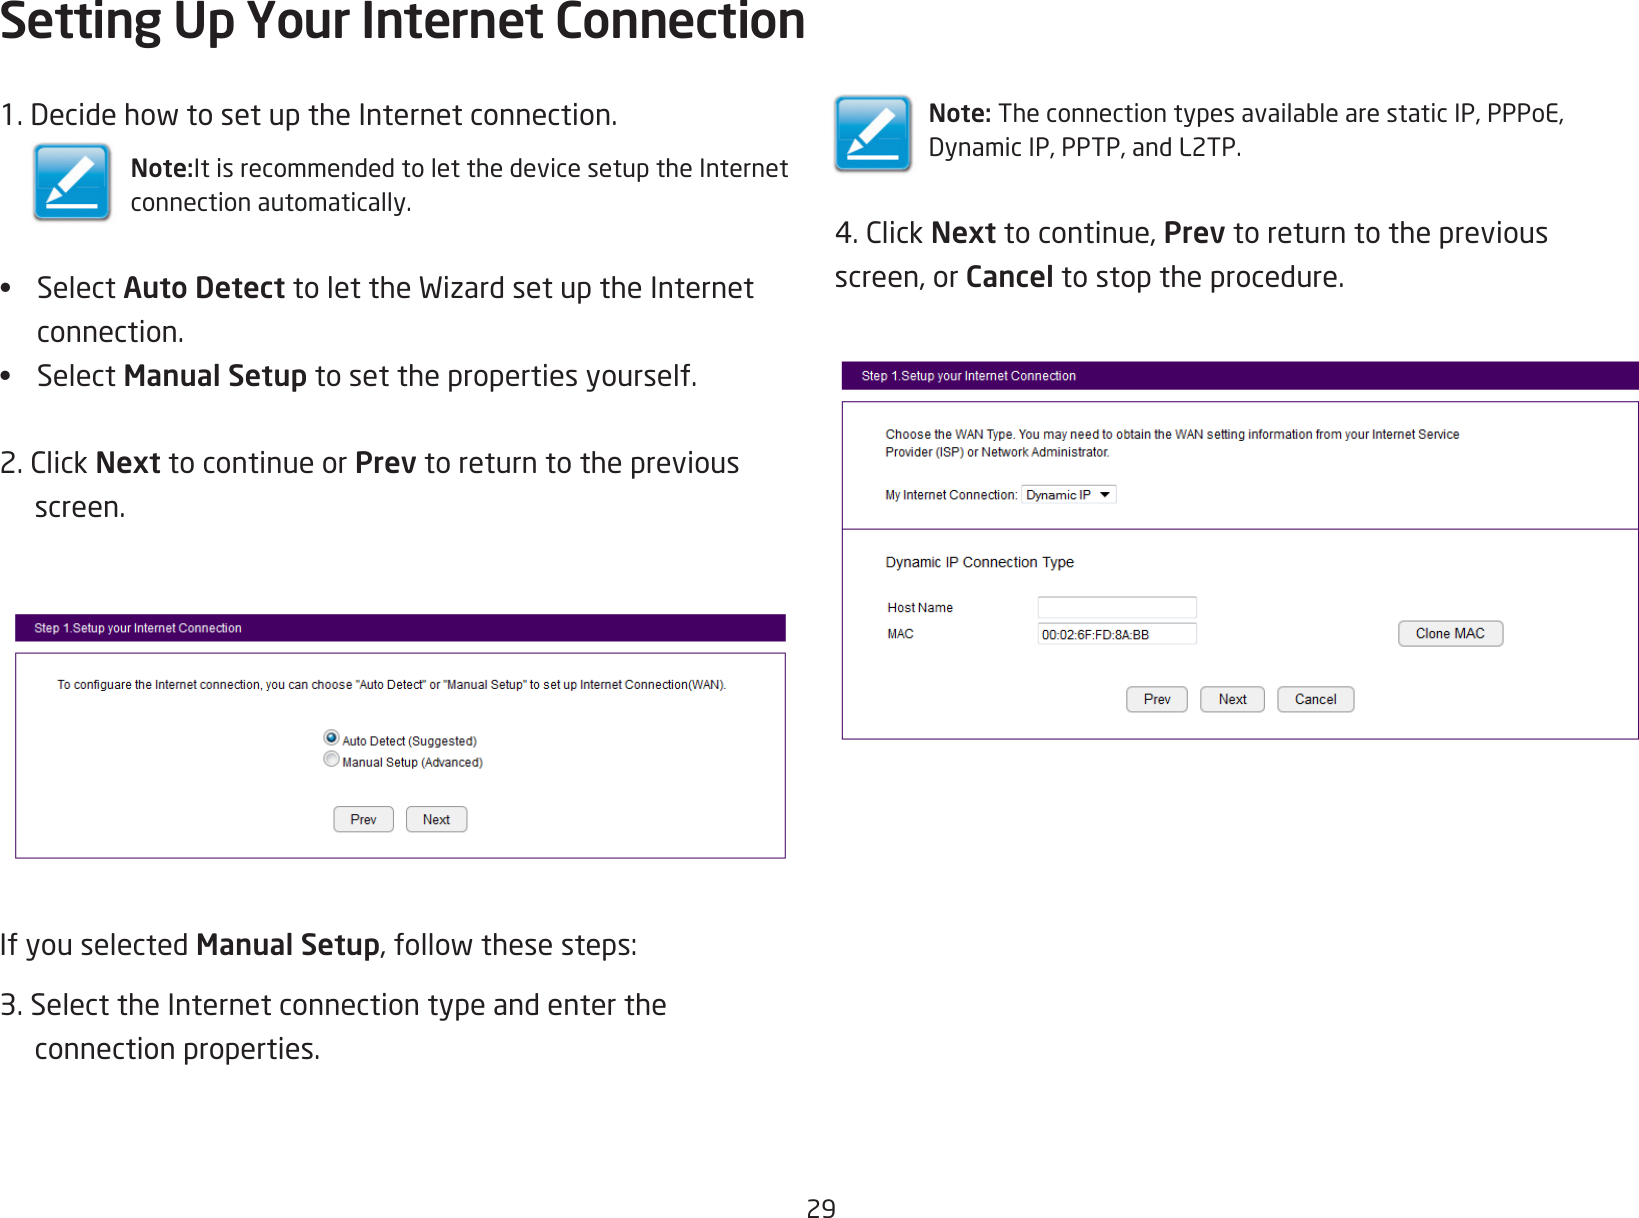 291.DecidehowtosetuptheInternetconnection.Note:It is recommended to let the device setup the Internetconnection automatically.• Select Auto DetecttolettheWizardsetuptheInternetconnection.• Select Manual Setup to set the properties yourself.2.ClickNext to continue or Prev to return to the previous screen.If you selected Manual Setup,followthesesteps:3. Select the Internet connection type and enter the  connection properties.Setting Up Your Internet ConnectionNote:TheconnectiontypesavailablearestaticIP,PPPoE,DynamicIP,PPTP,andL2TP.4.ClickNext to continue, Prev to return to the previousscreen, or Cancel to stop the procedure.